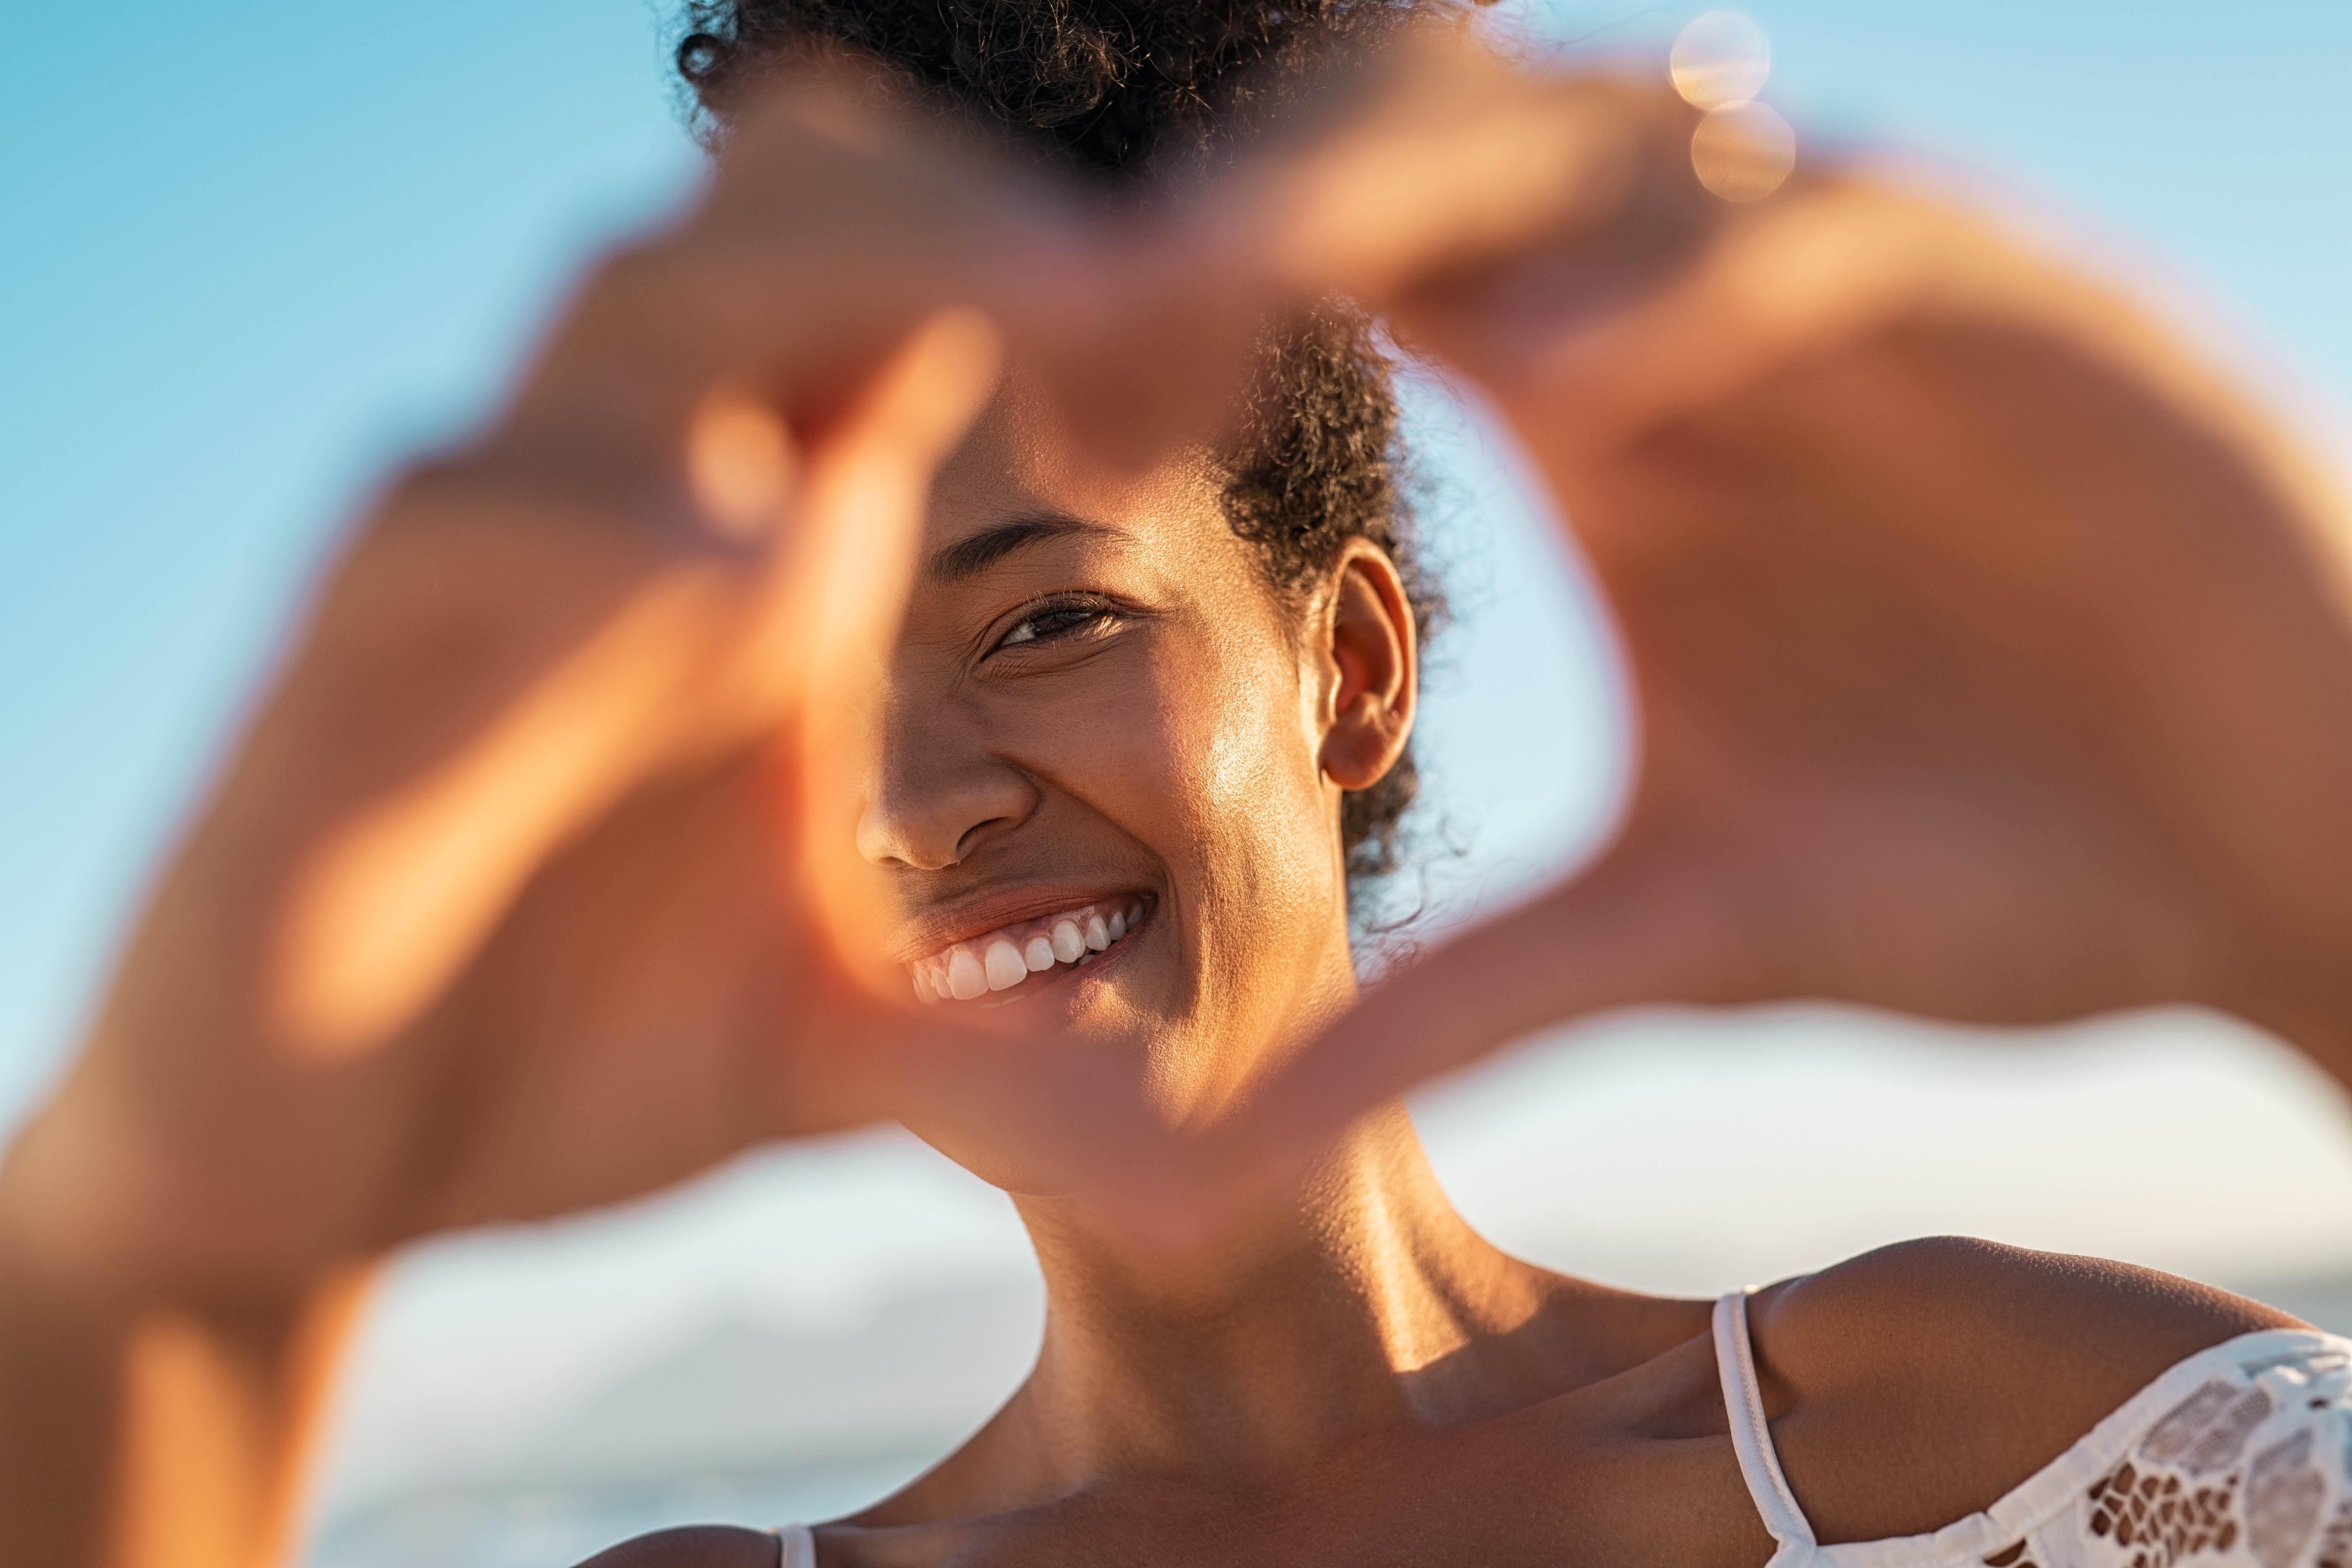 Young black woman with her hands in the shape of a heart in front of her face. Bright blue sky in the background